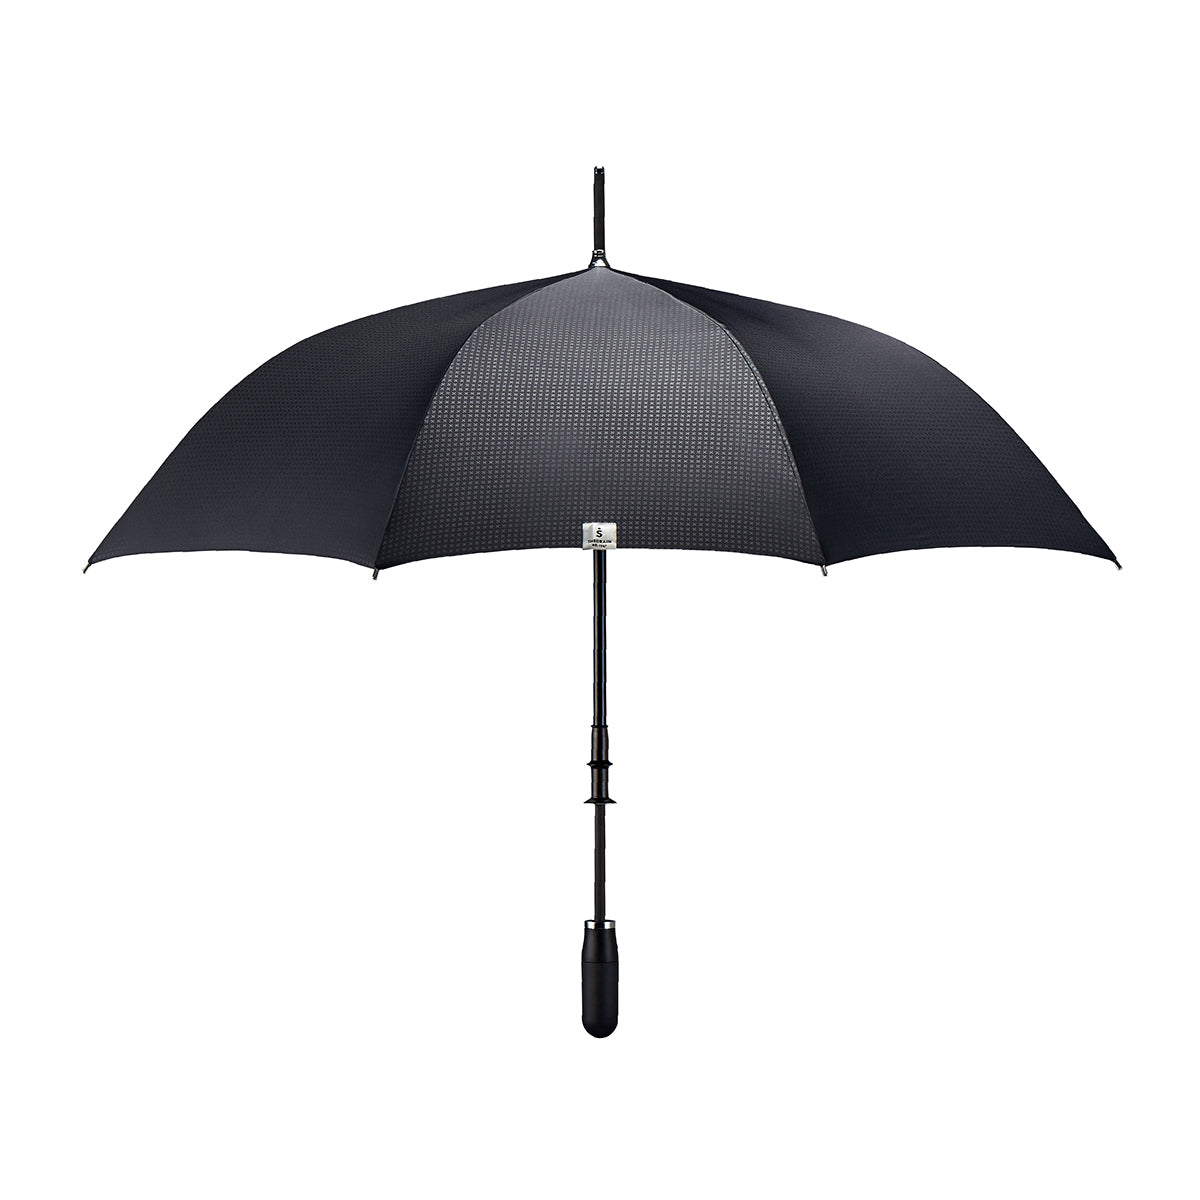 straight on view of a handmade manual open luxury golf umbrella with a matte black TPR grip handle, Teflon-coated fine denier woven black polyester twill canopy, chrome trim, carbon fiber shaft, fiberglass ribs, and a reflective strap embroidered with “ShedRain Stratus.”